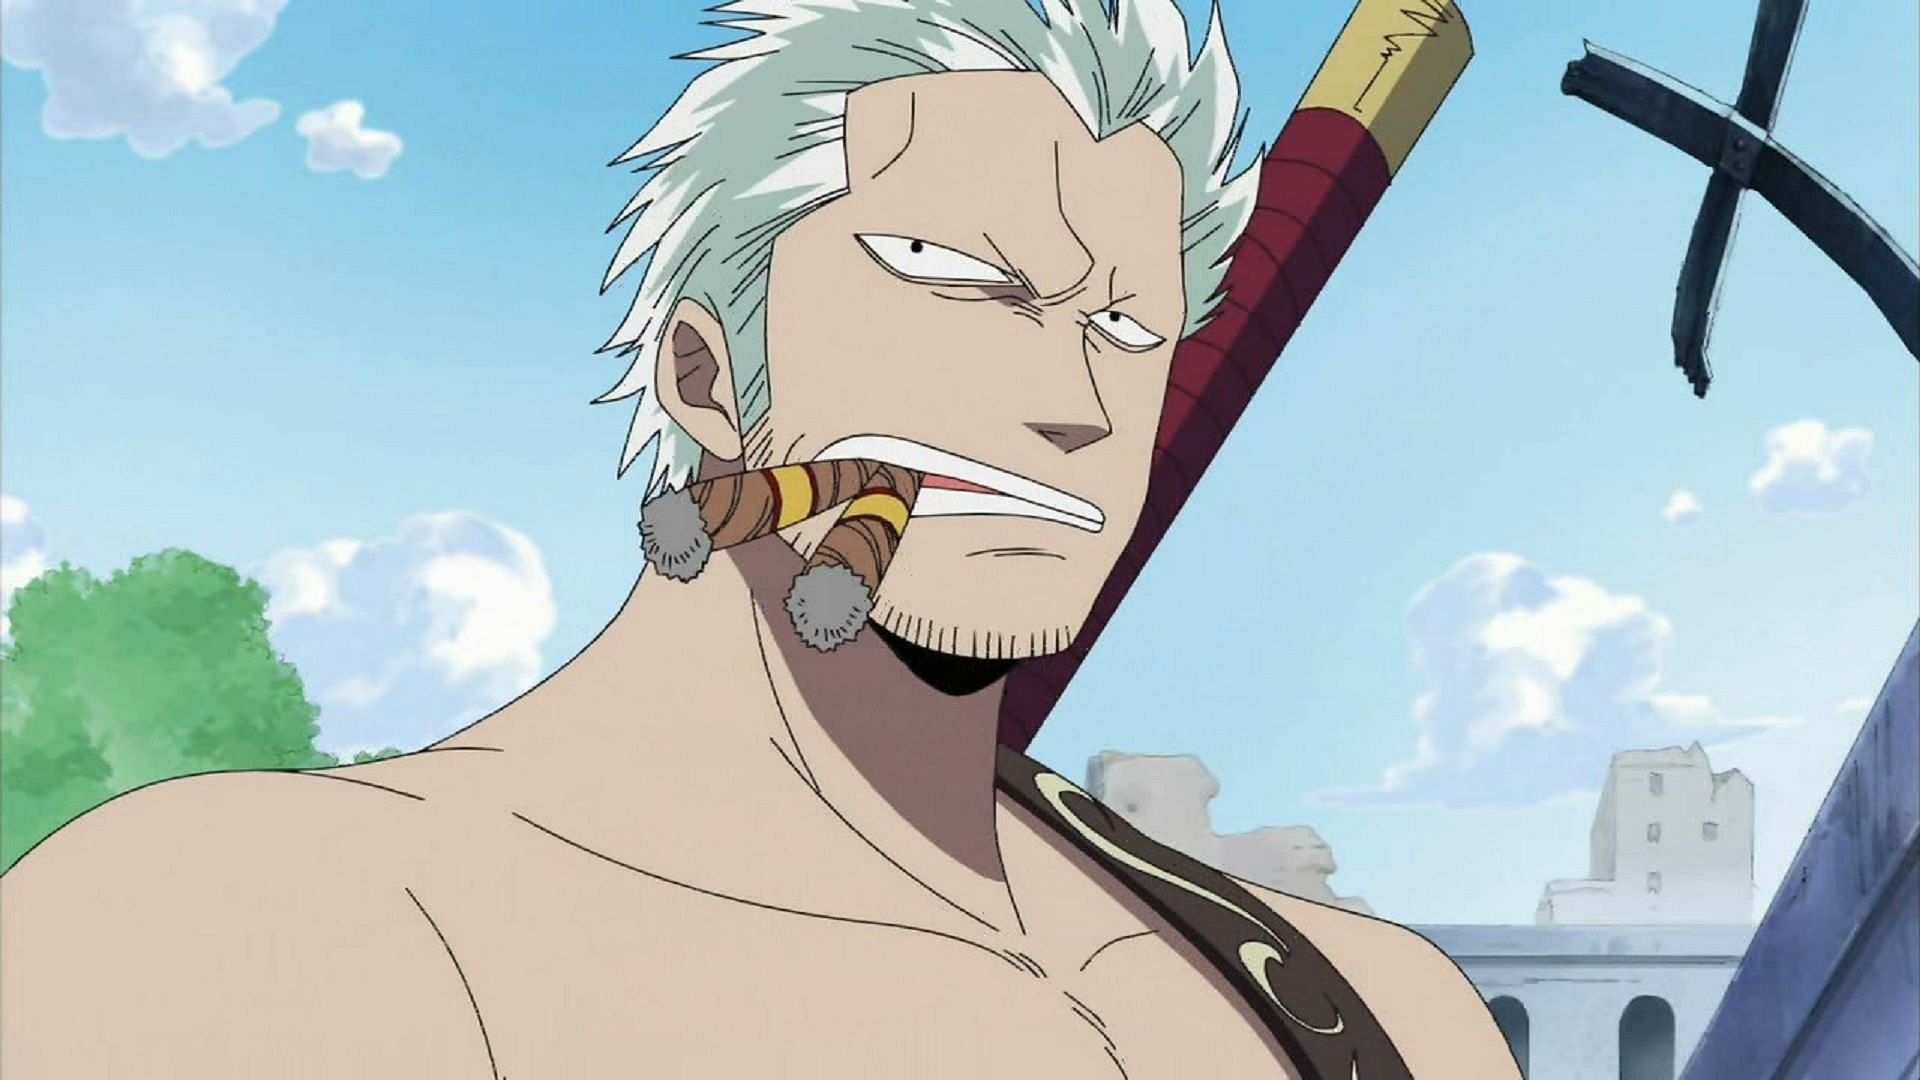 Smoker, as seen in One Piece&#039;s East Blue Saga (Image via Toei Animation, One Piece)